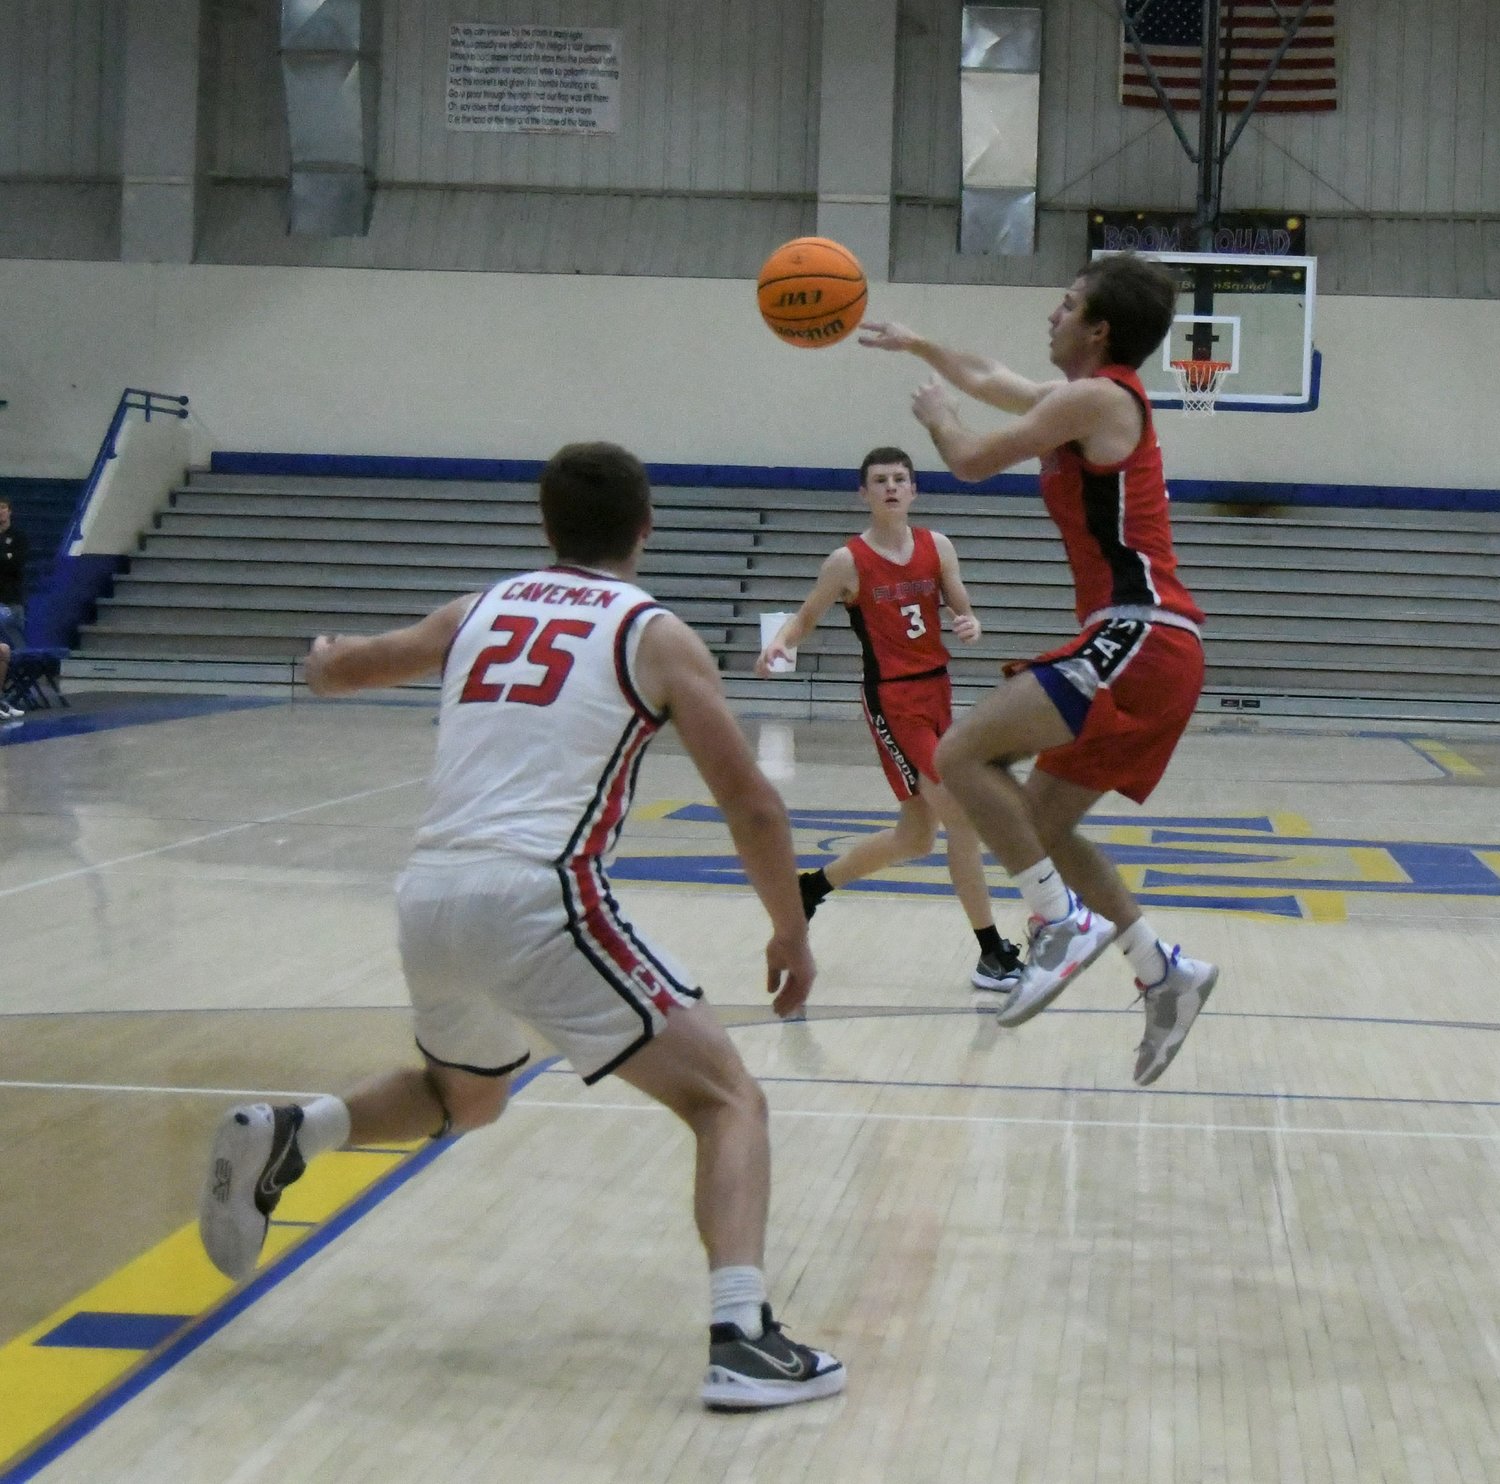 An image from the Flippin-Cave City senior boys game played Wednesday in the Ultimate Auto Group Invitational at The Hangar.